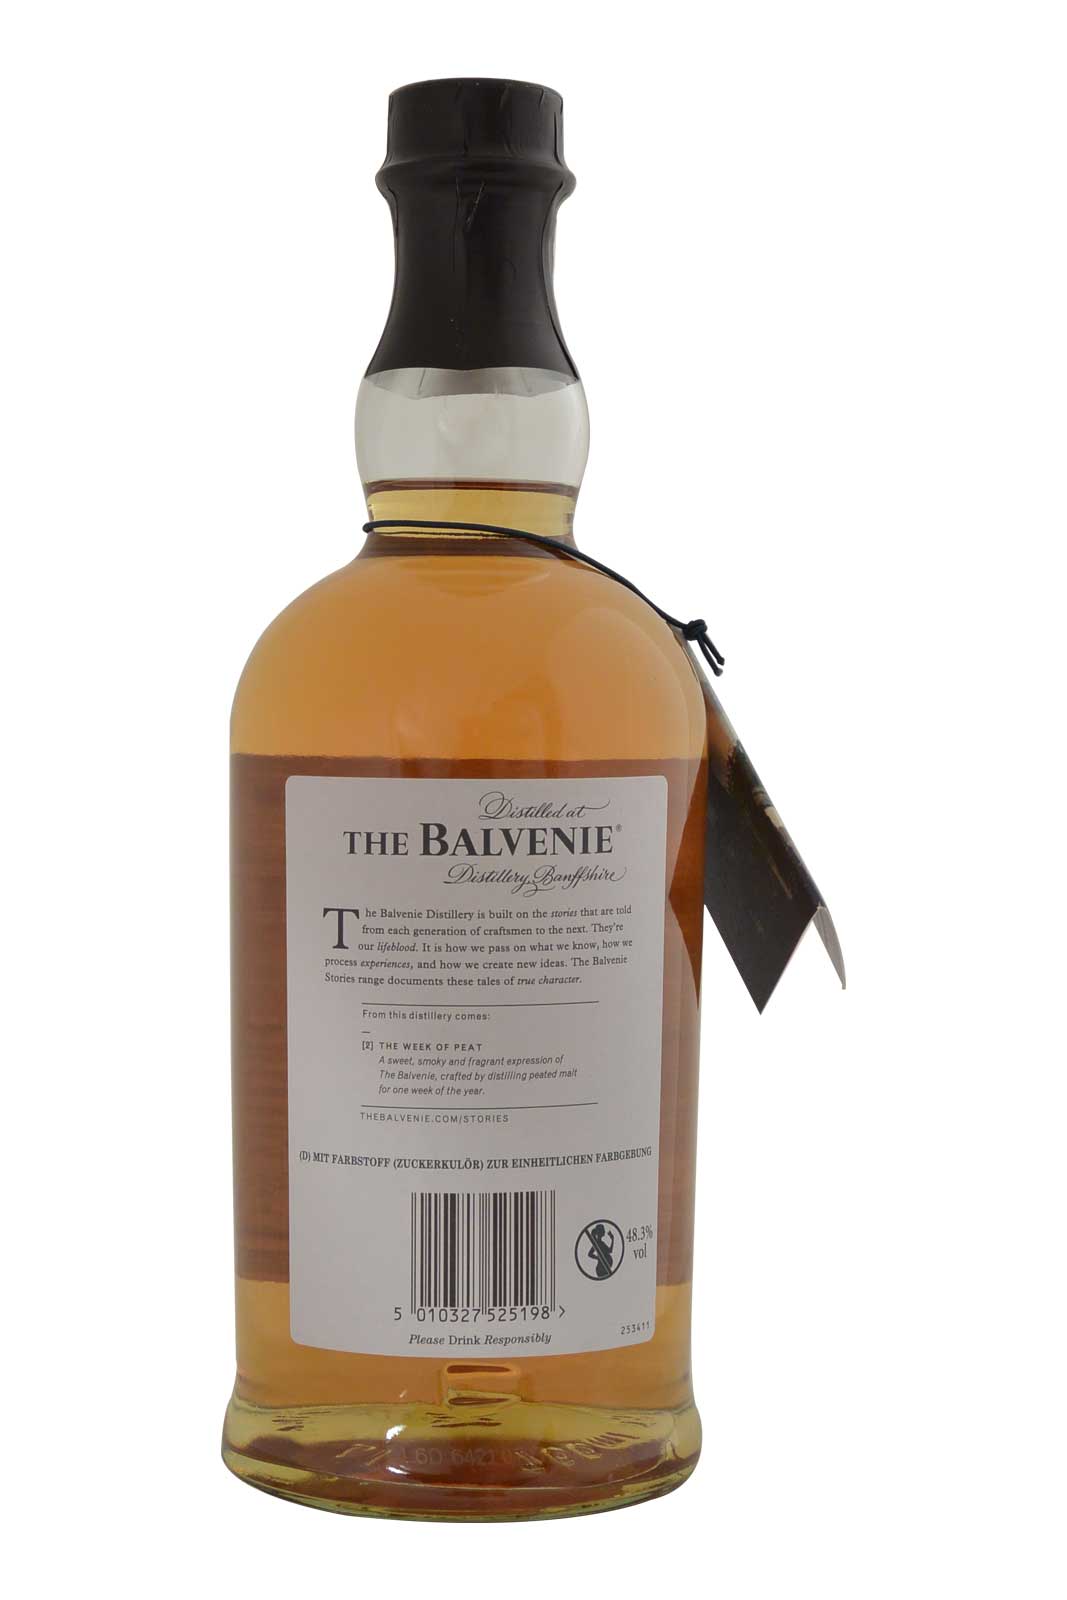 Balvenie 14 Year Old The Week of Peat